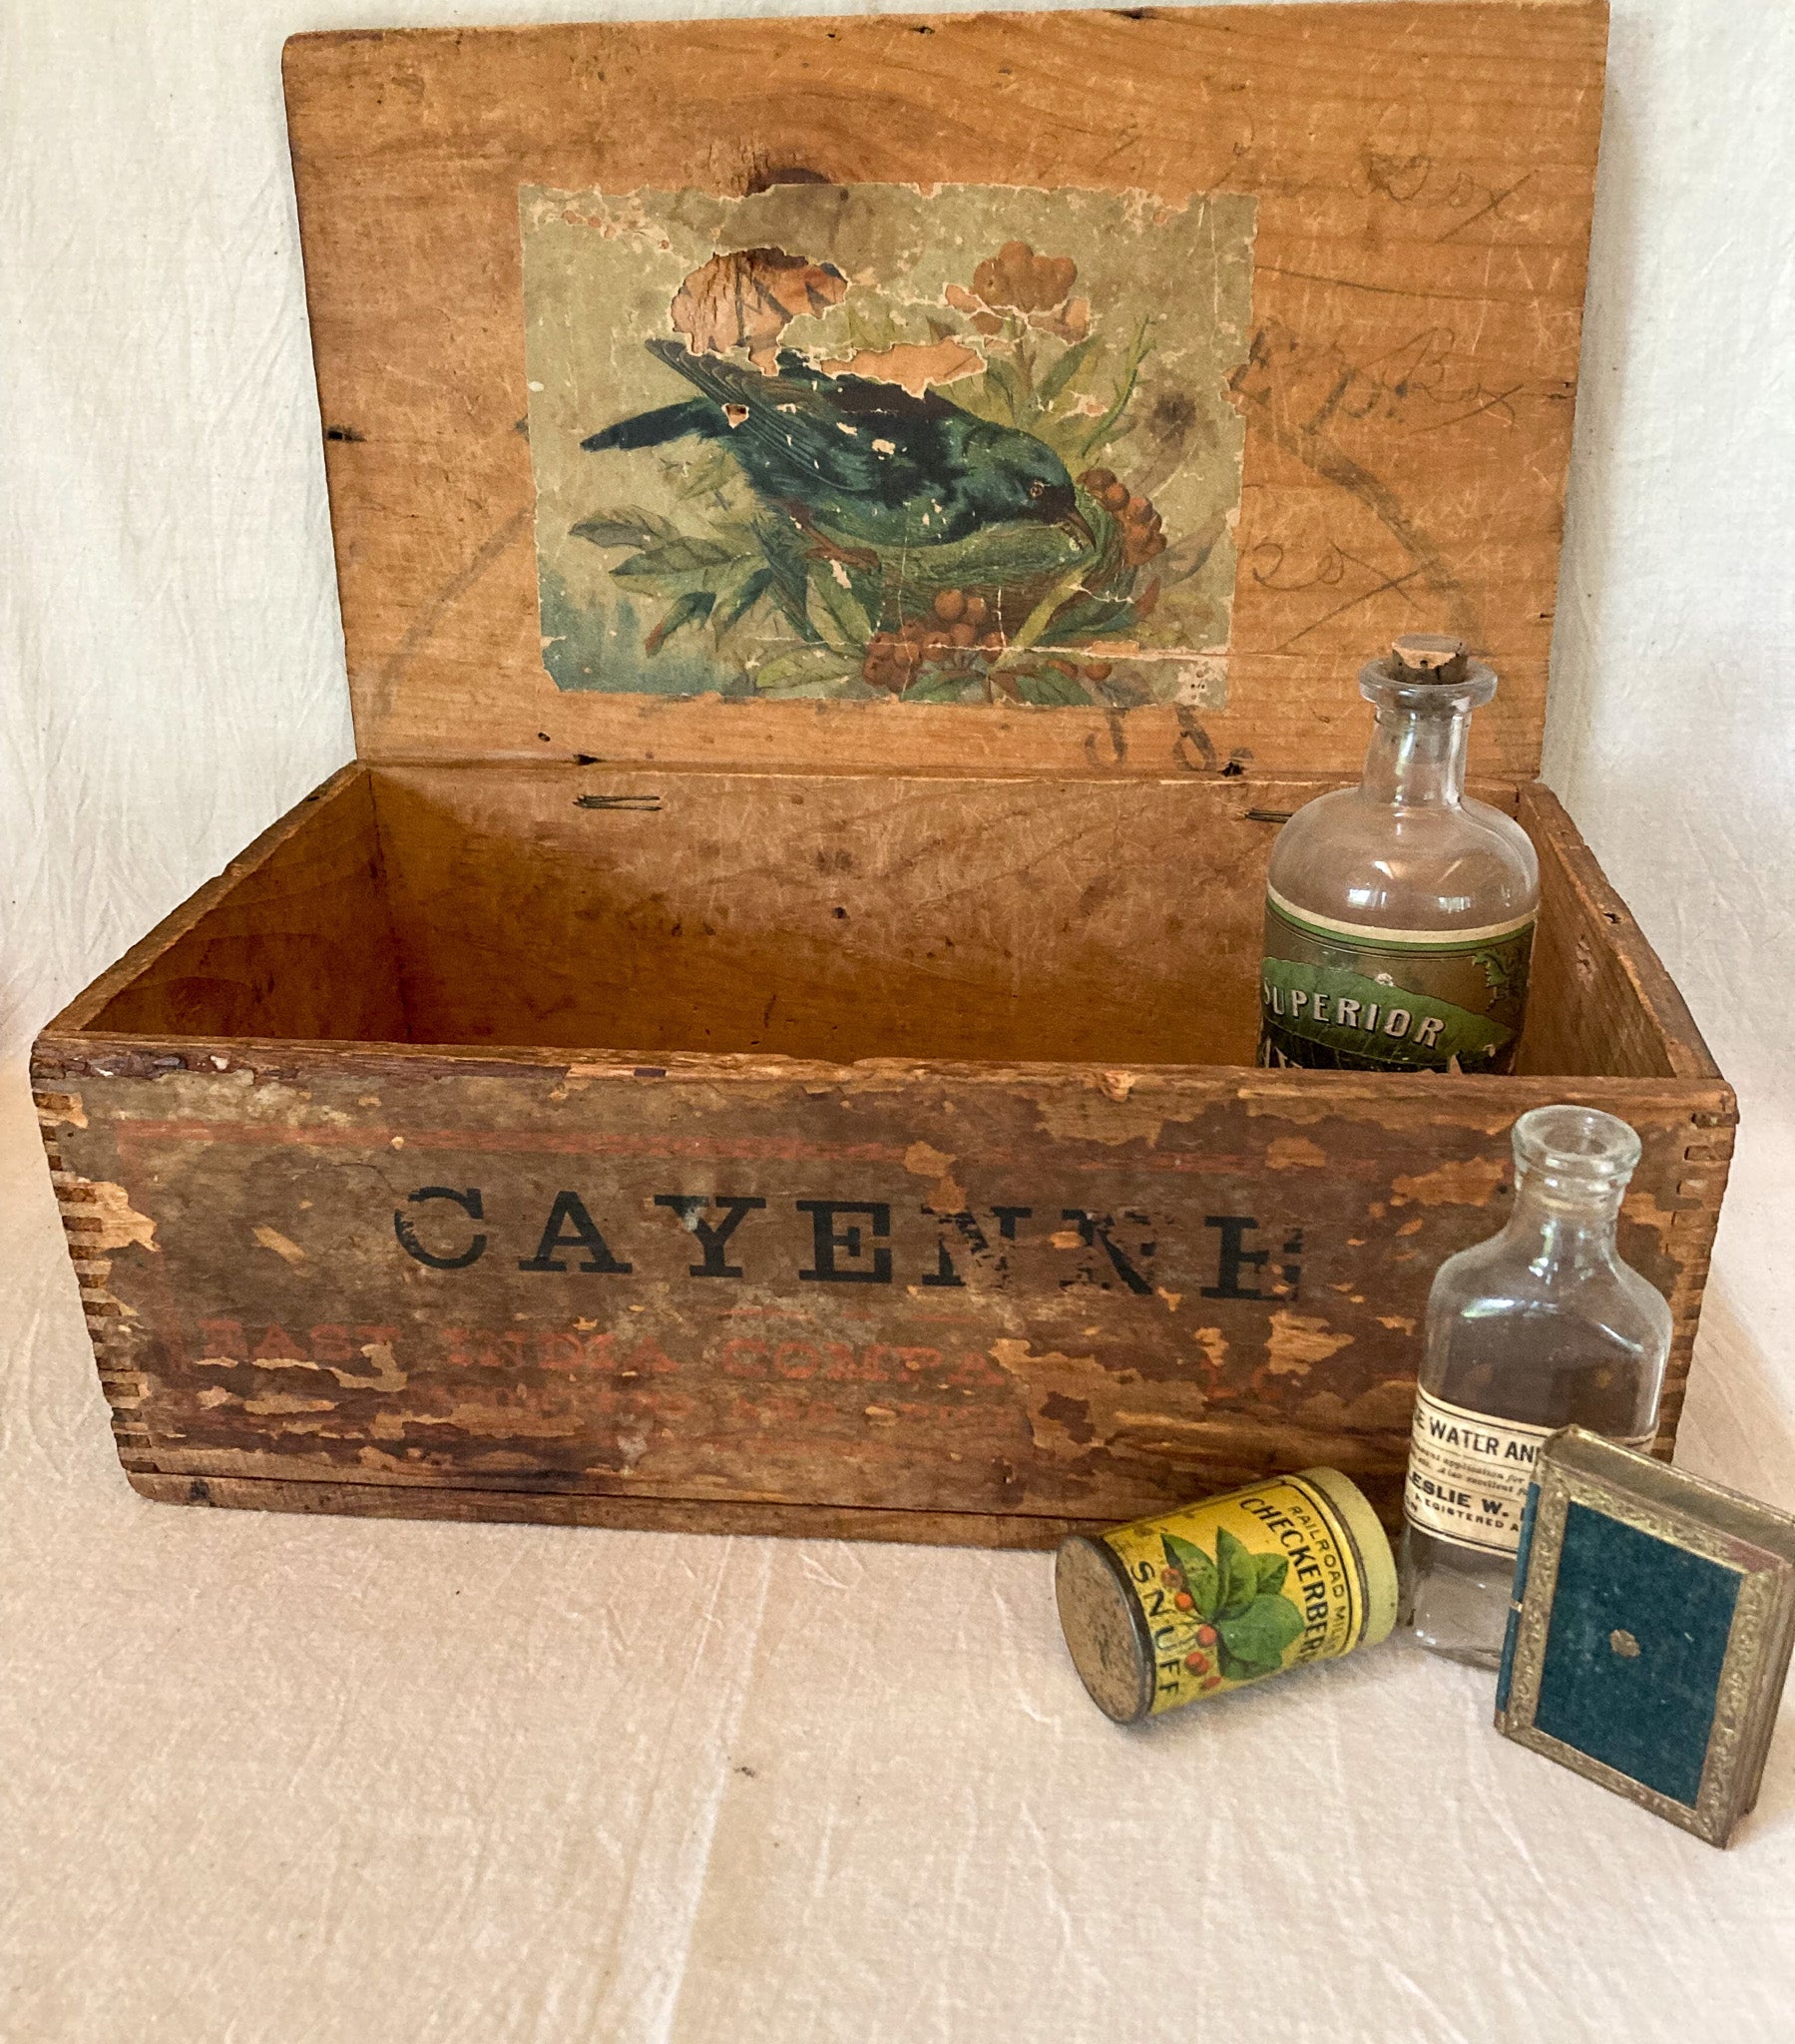 Antique Wooden Cayenne Pepper Box, East India Company